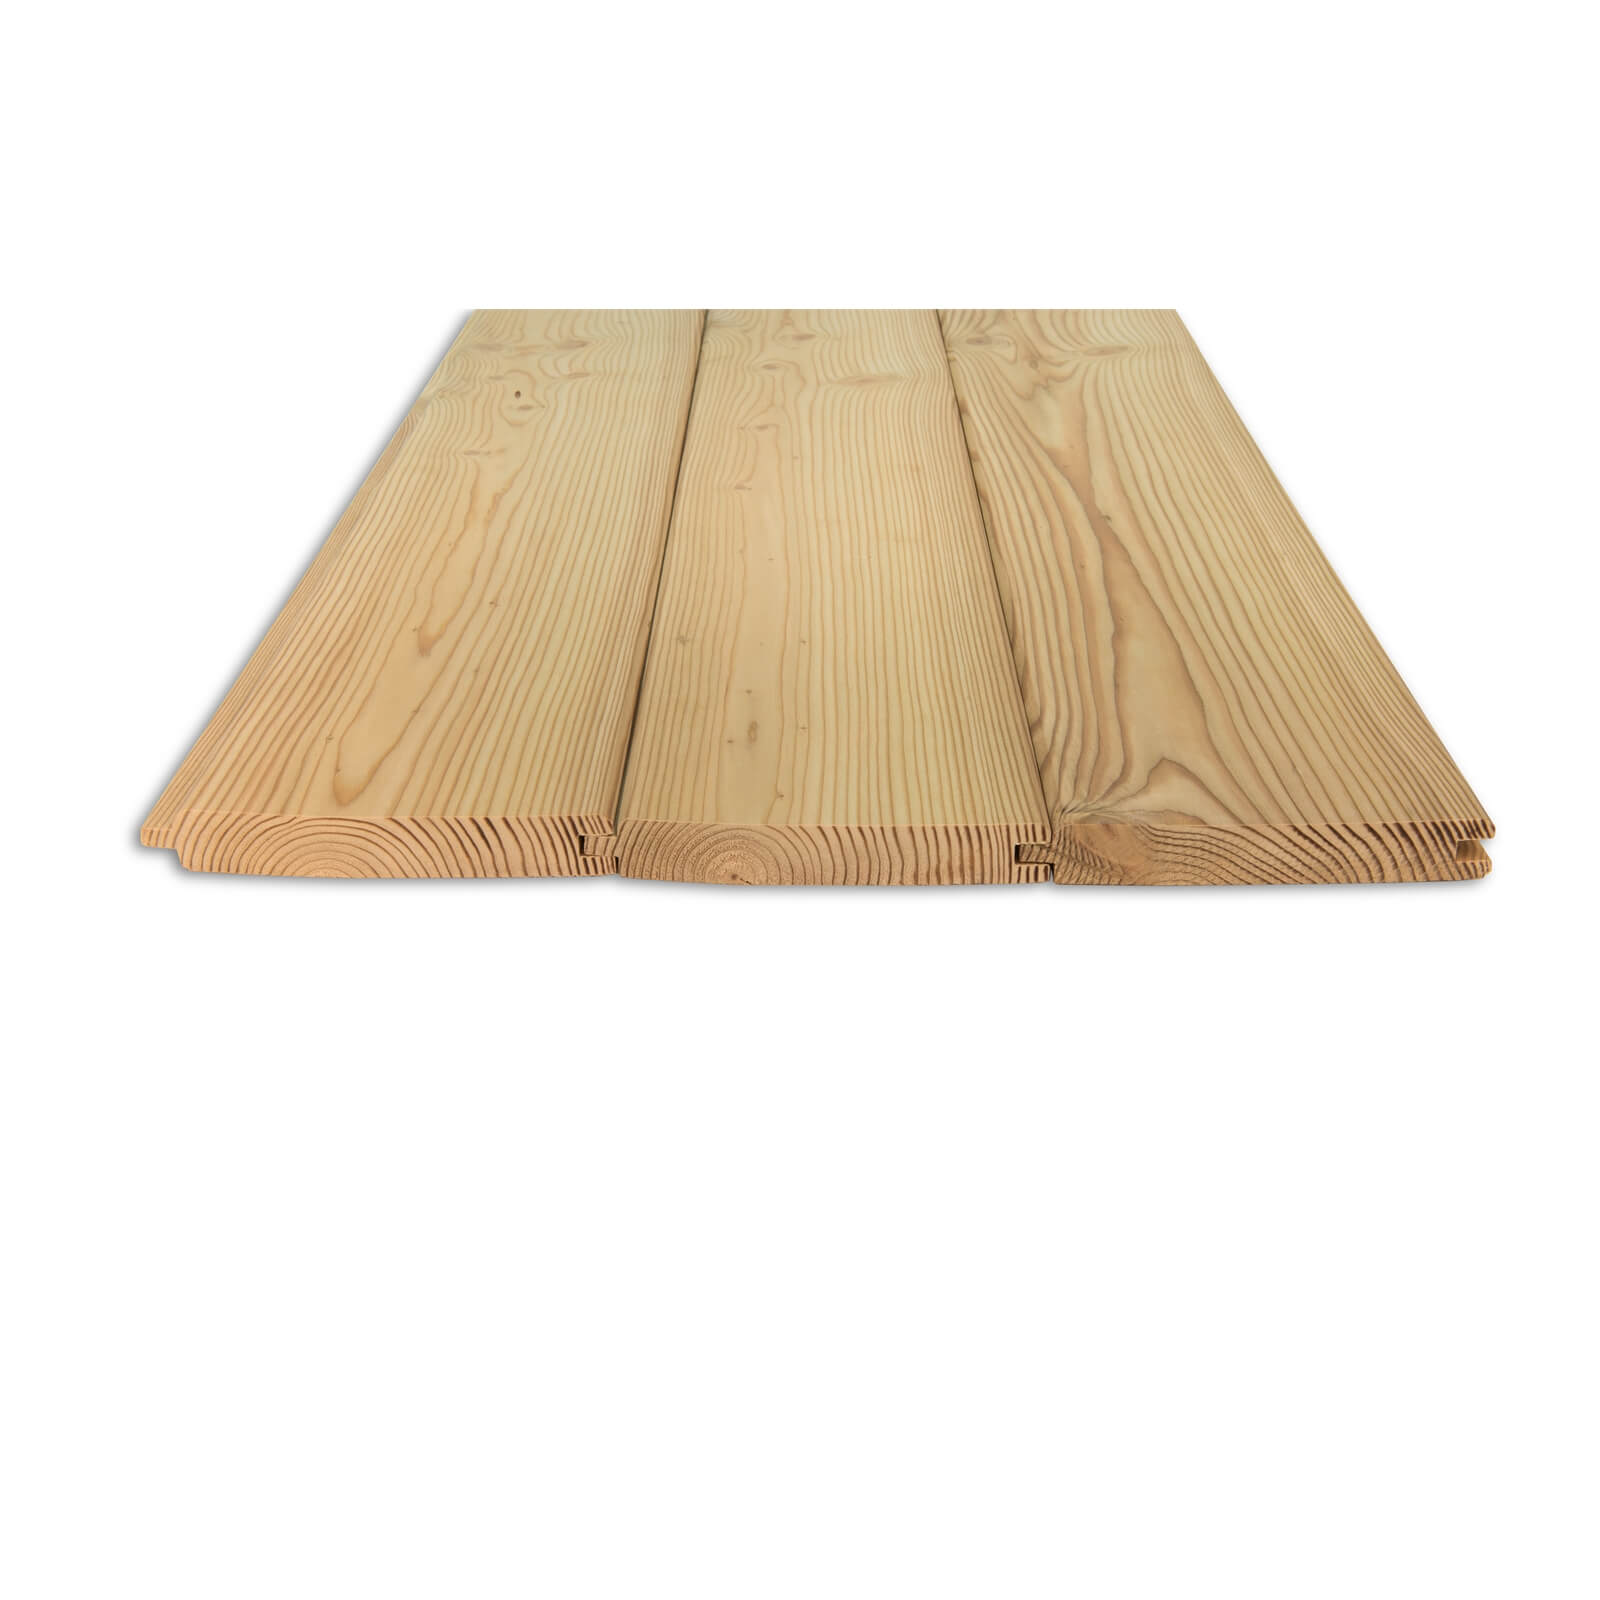 Siberian Larch Tongue and Groove Cladding 19x145mmx4.0mtr (Pack of 5)